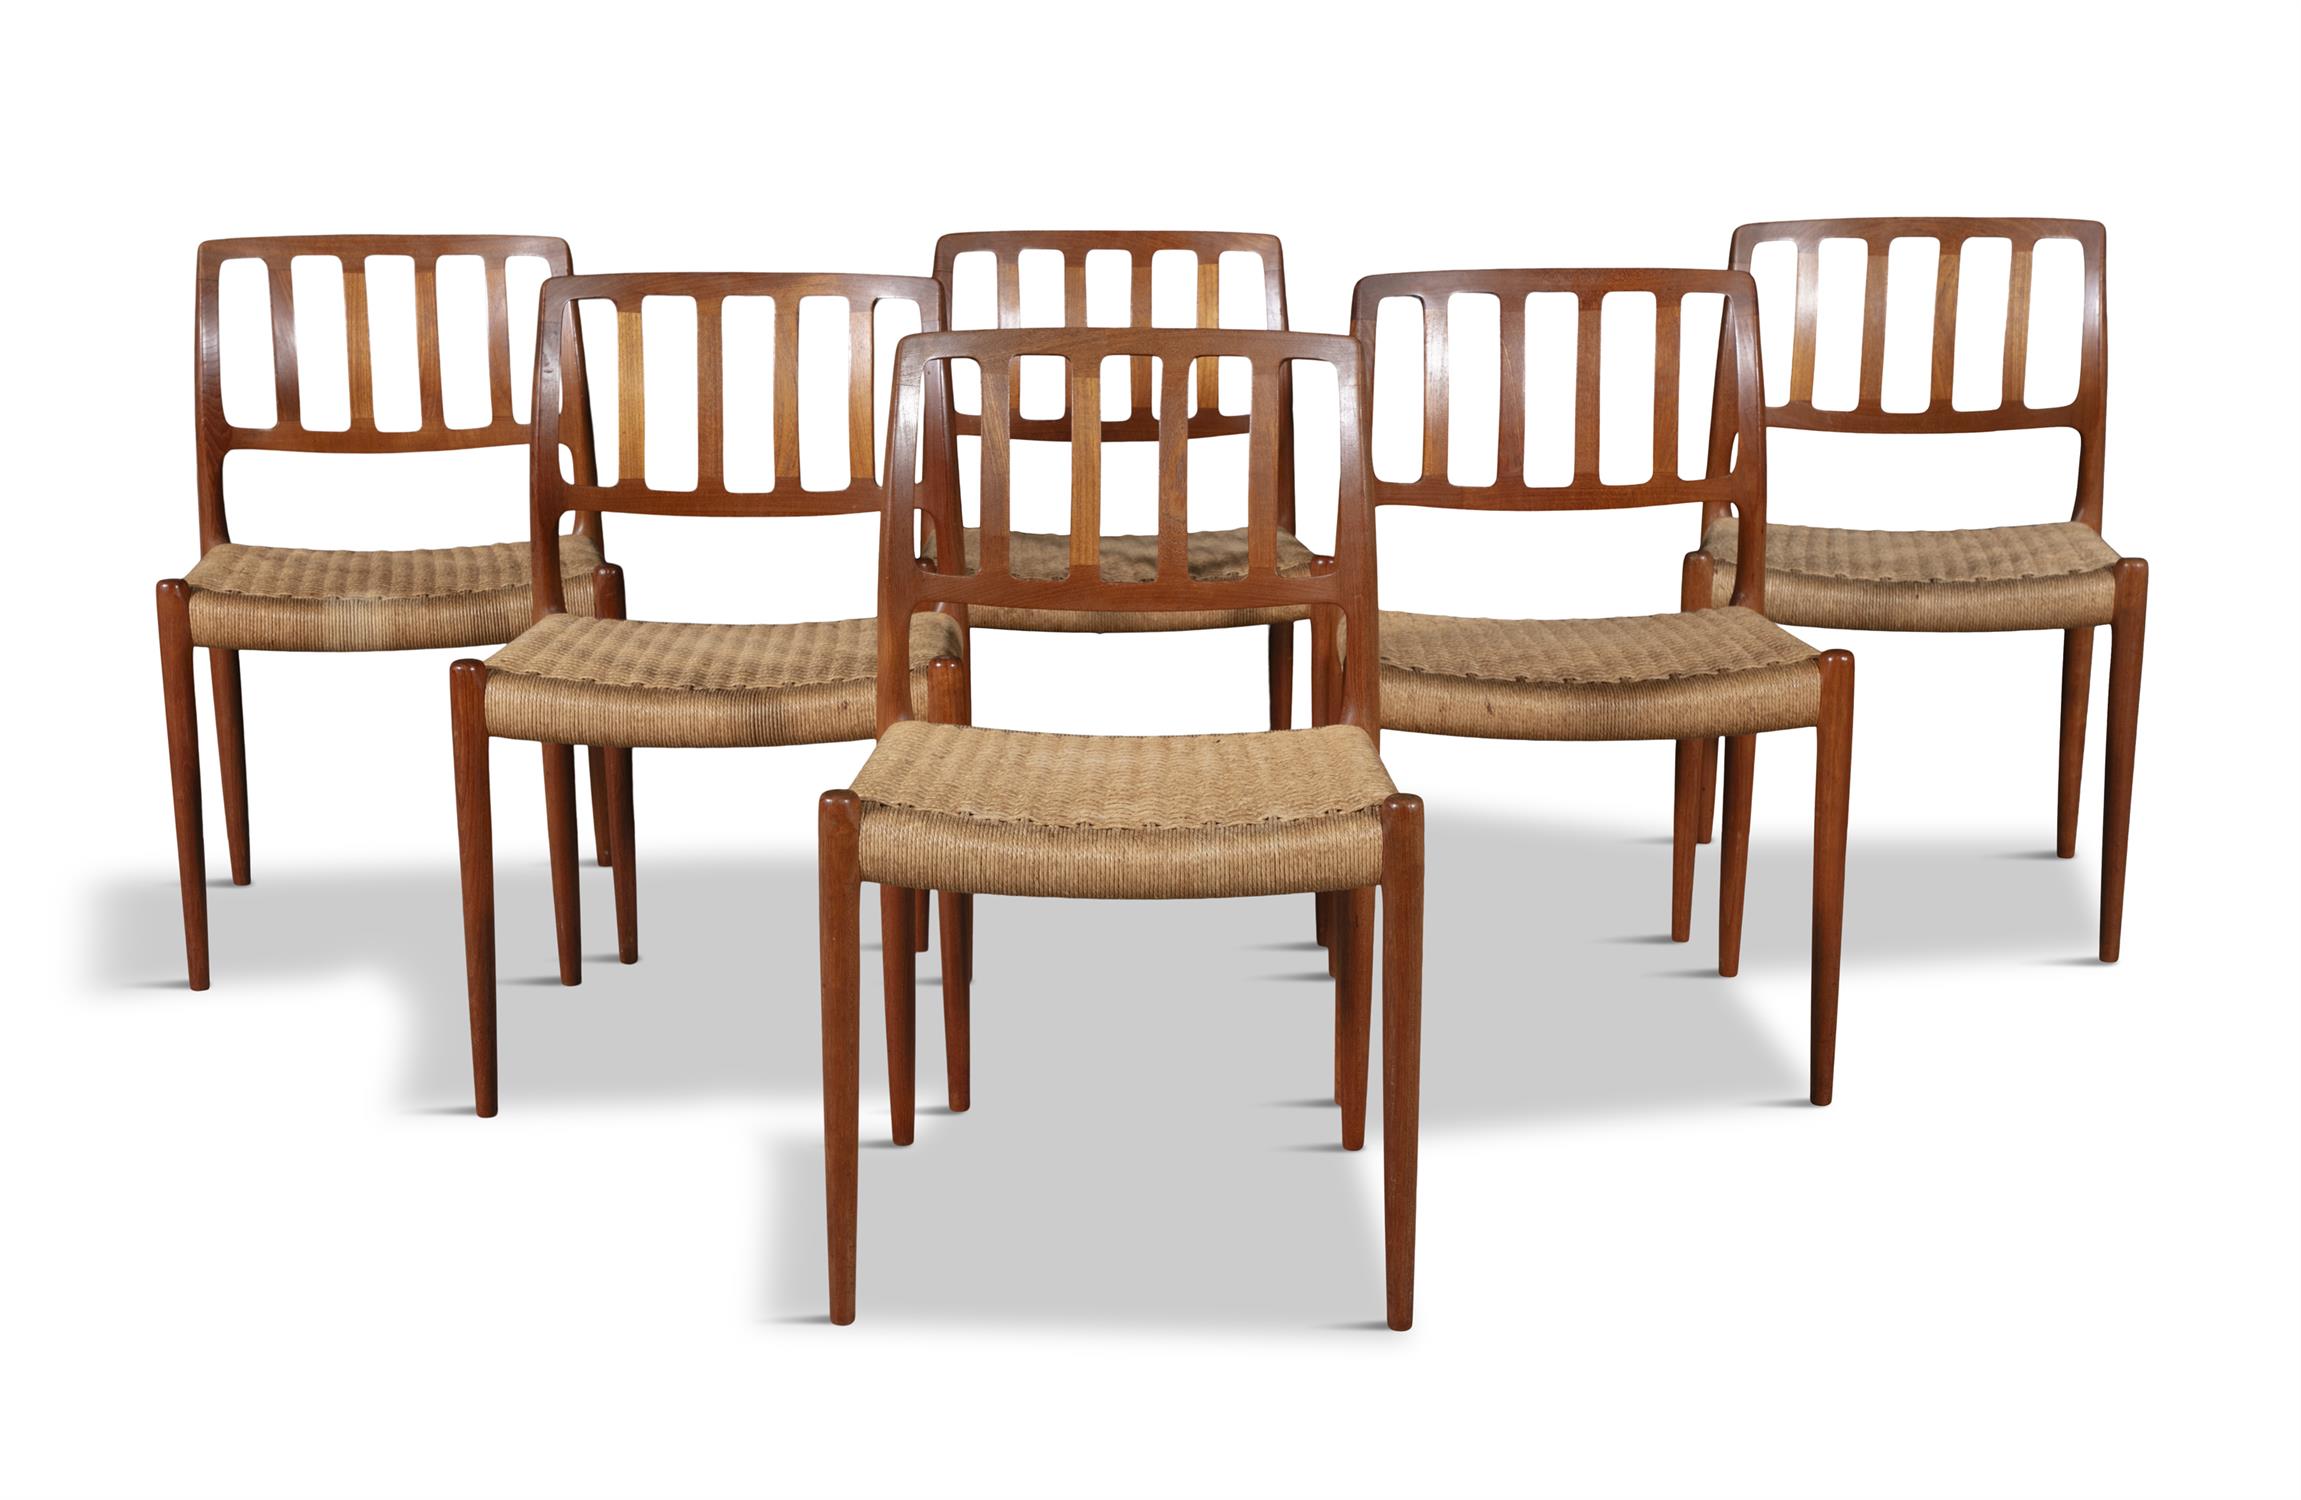 NEILS OTTO MØLLER (1920 - 1982) A set of six cane work dining chairs by Niels Otto Møller. - Image 2 of 5